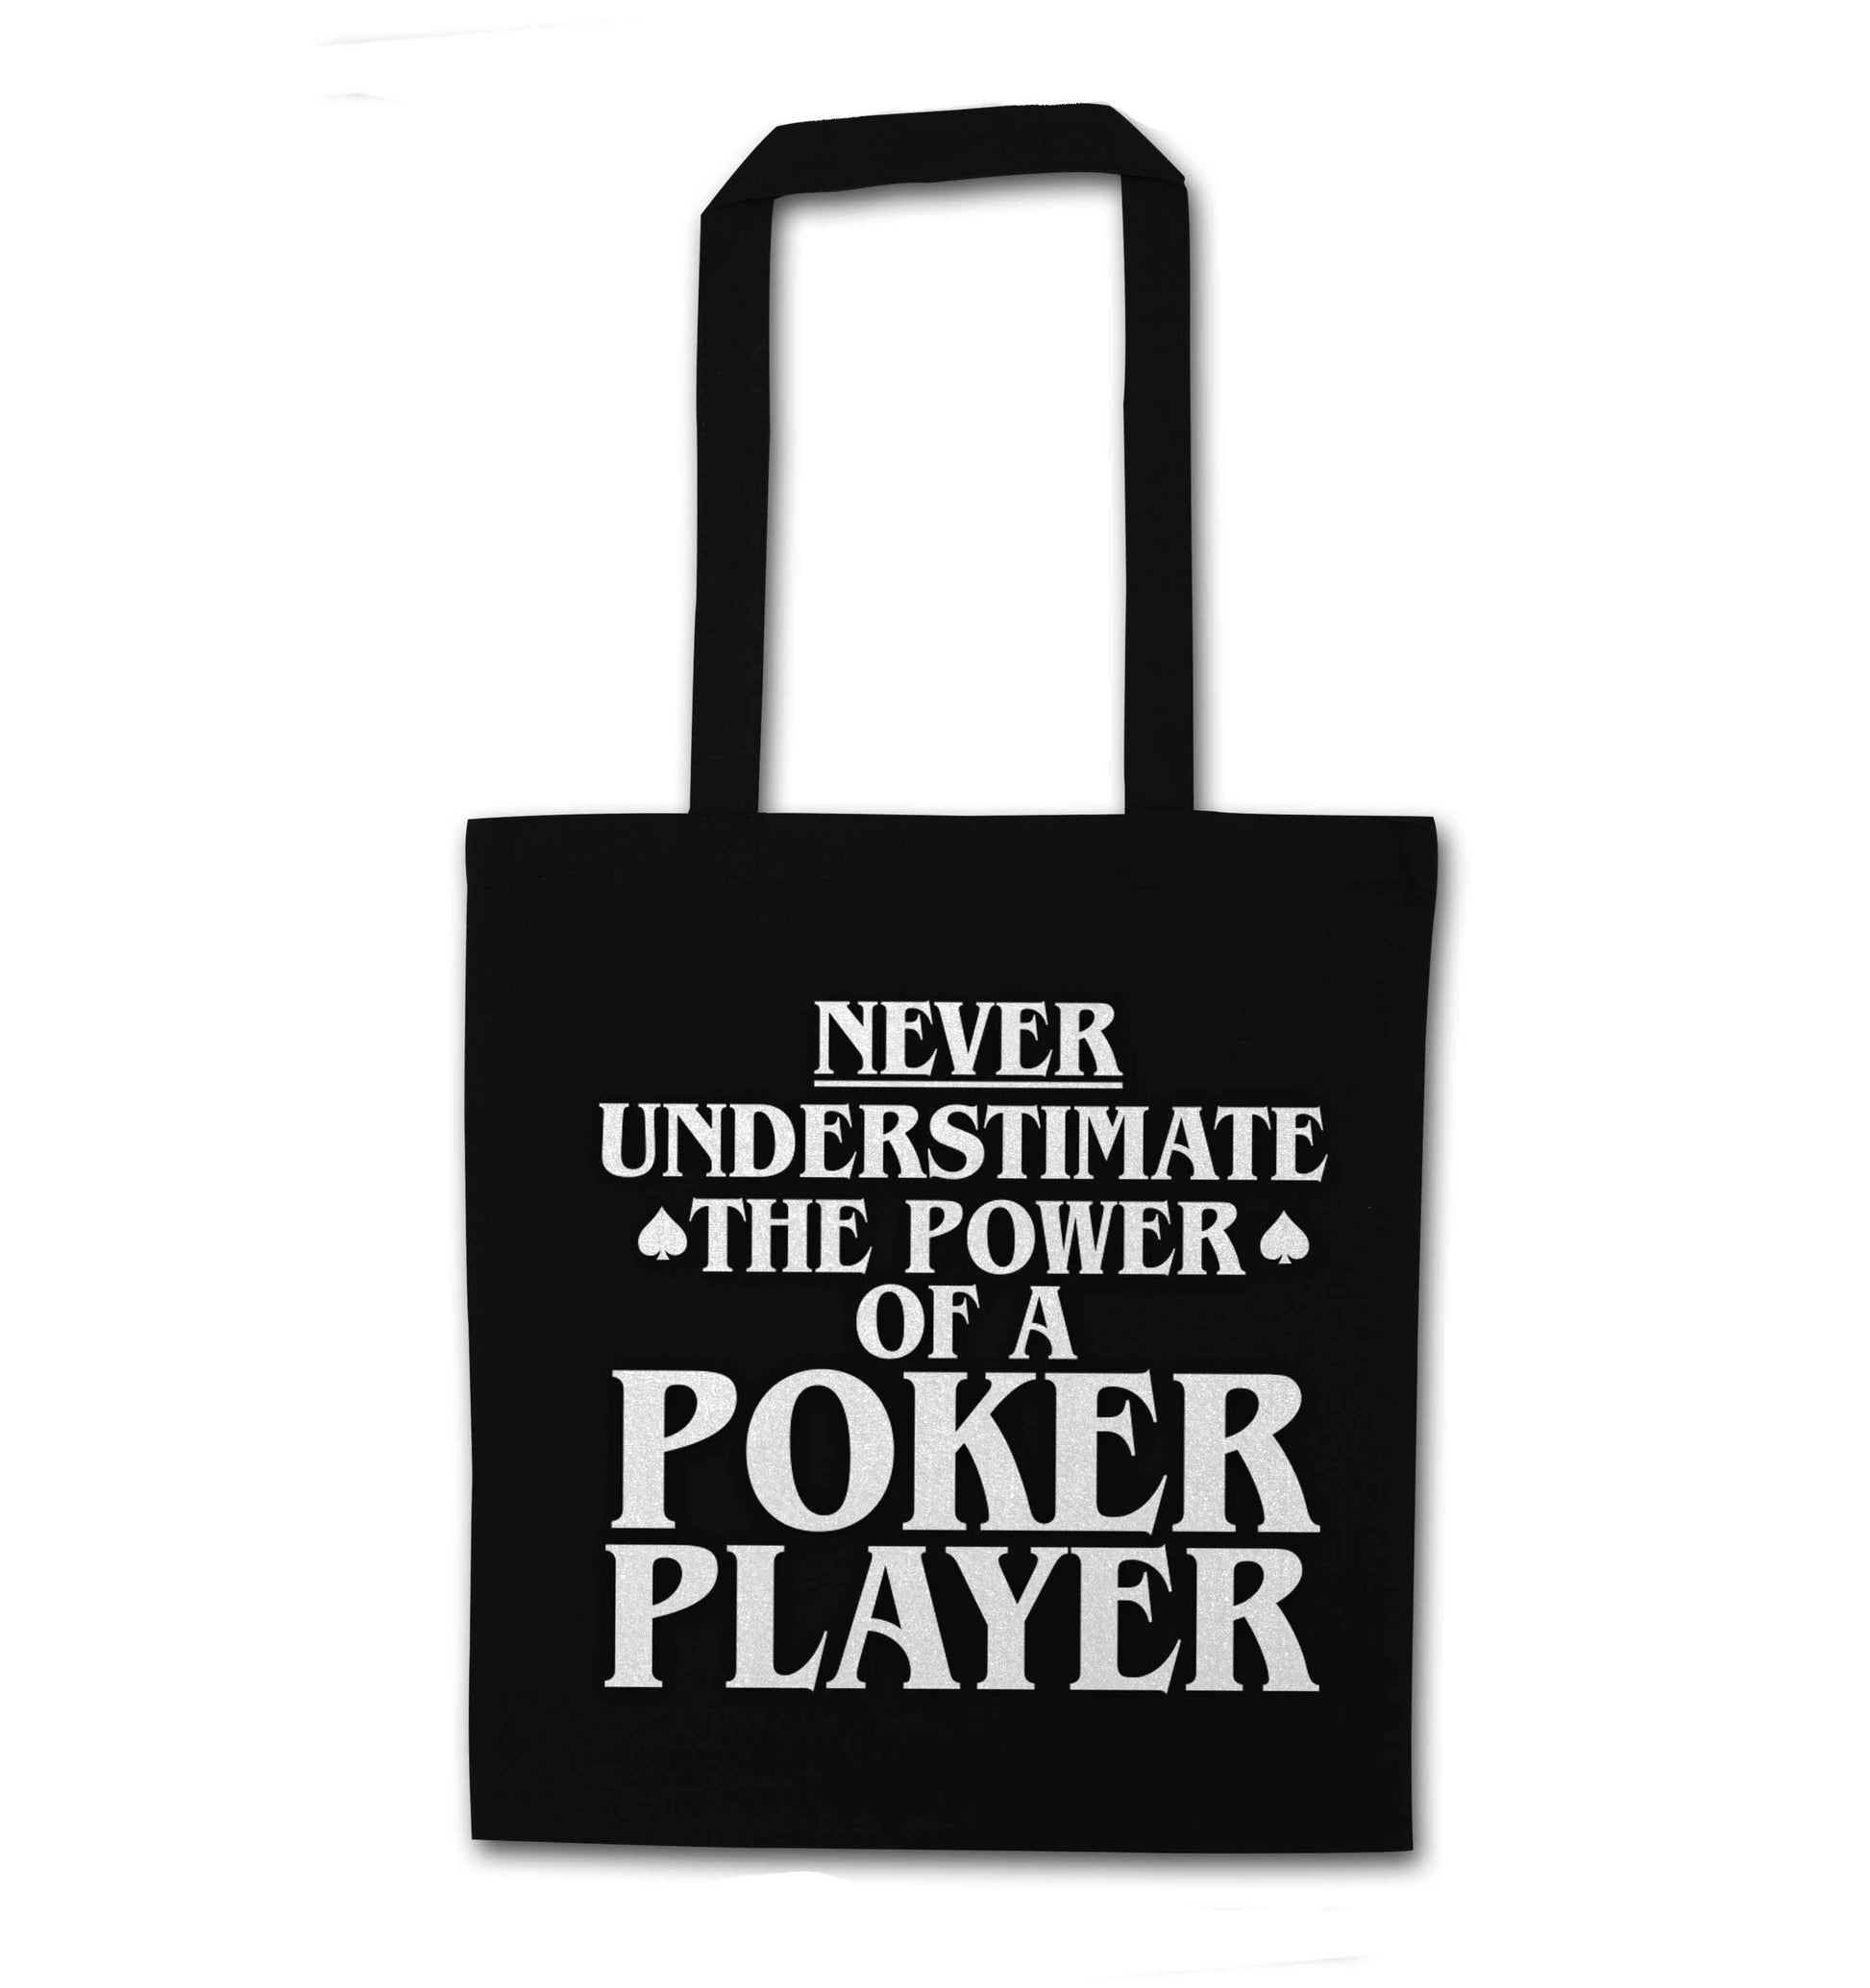 Never understimate the power of a poker player black tote bag